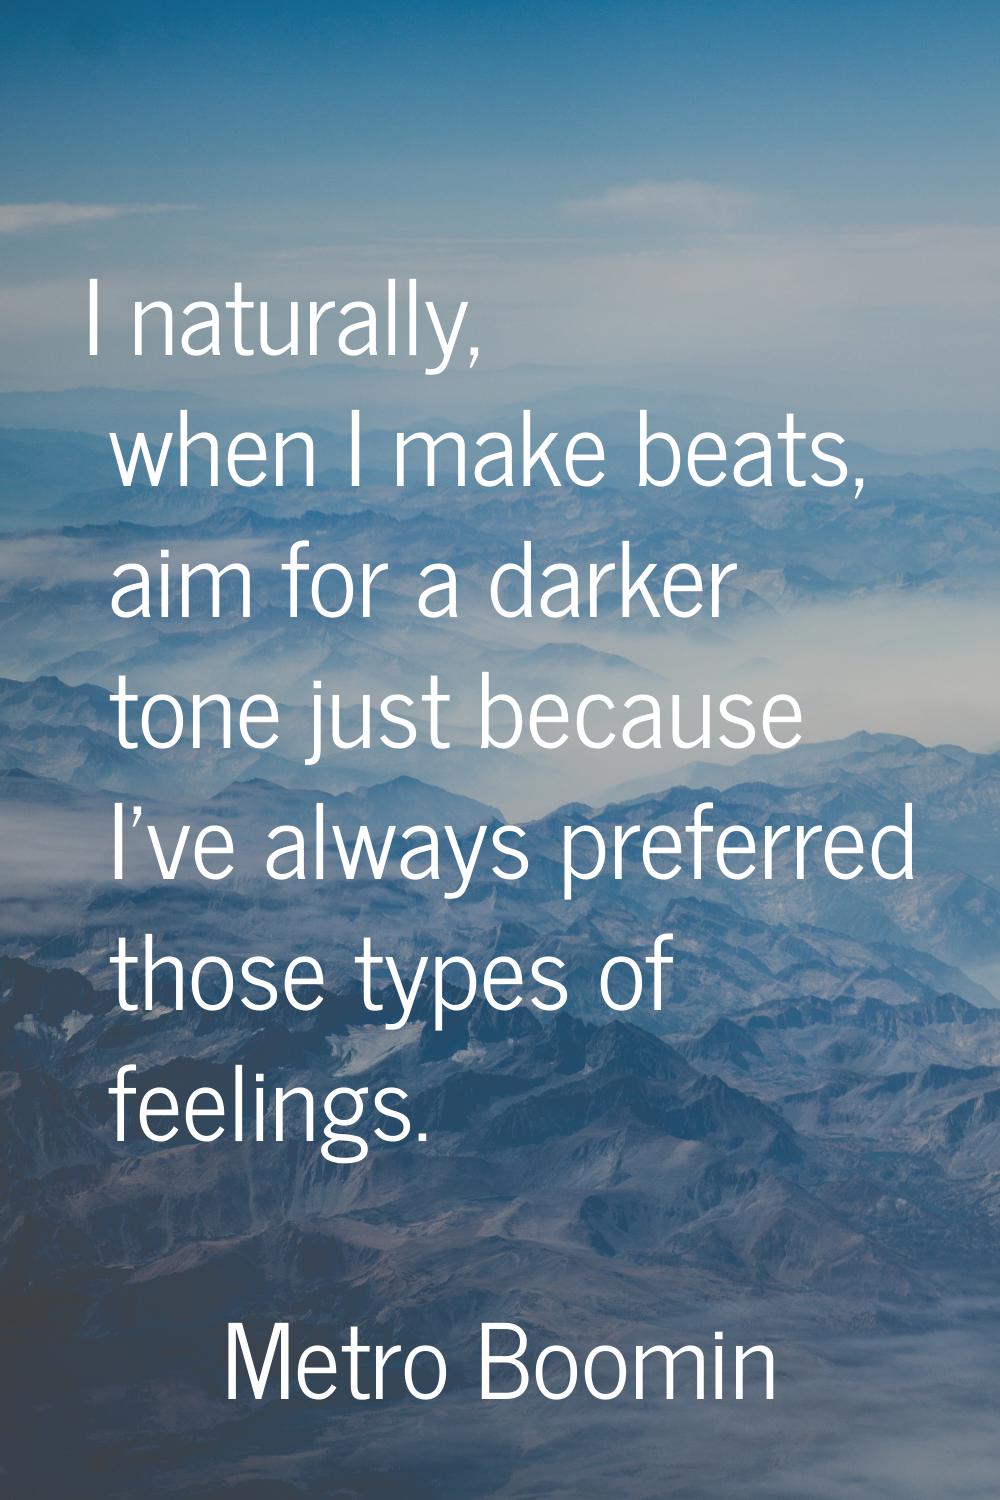 I naturally, when I make beats, aim for a darker tone just because I've always preferred those type